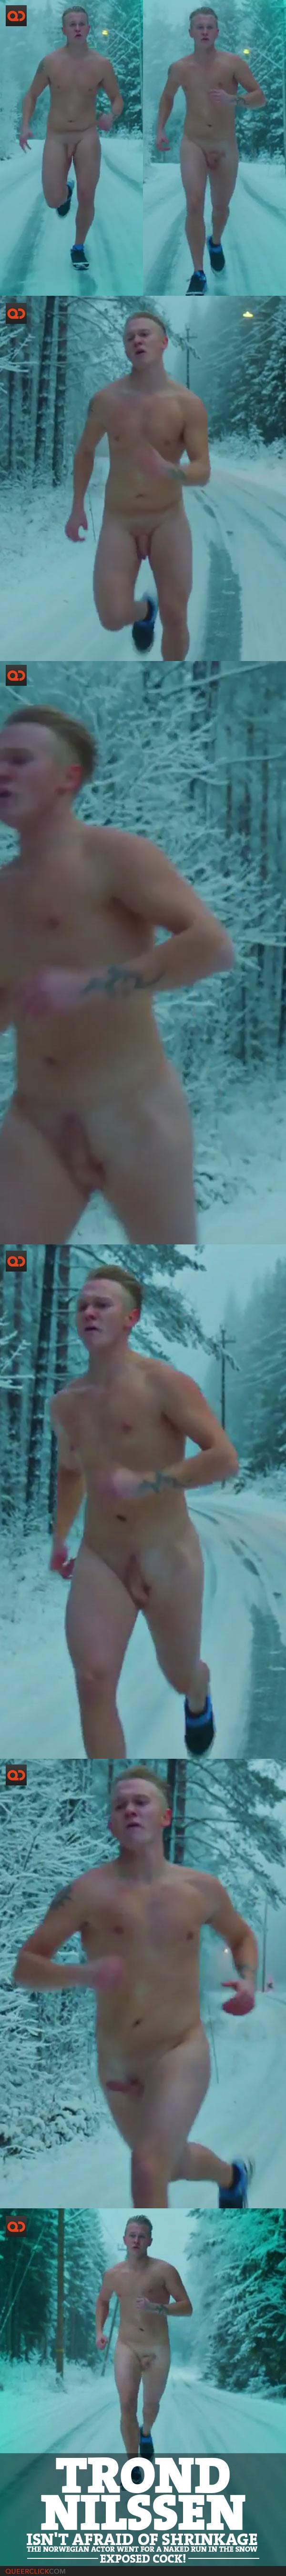 Trond Nielssen Isn't Afraid Of Shrinkage, The Norwegian Actor Went For A Naked Run In The Snow - Exposed Cock!